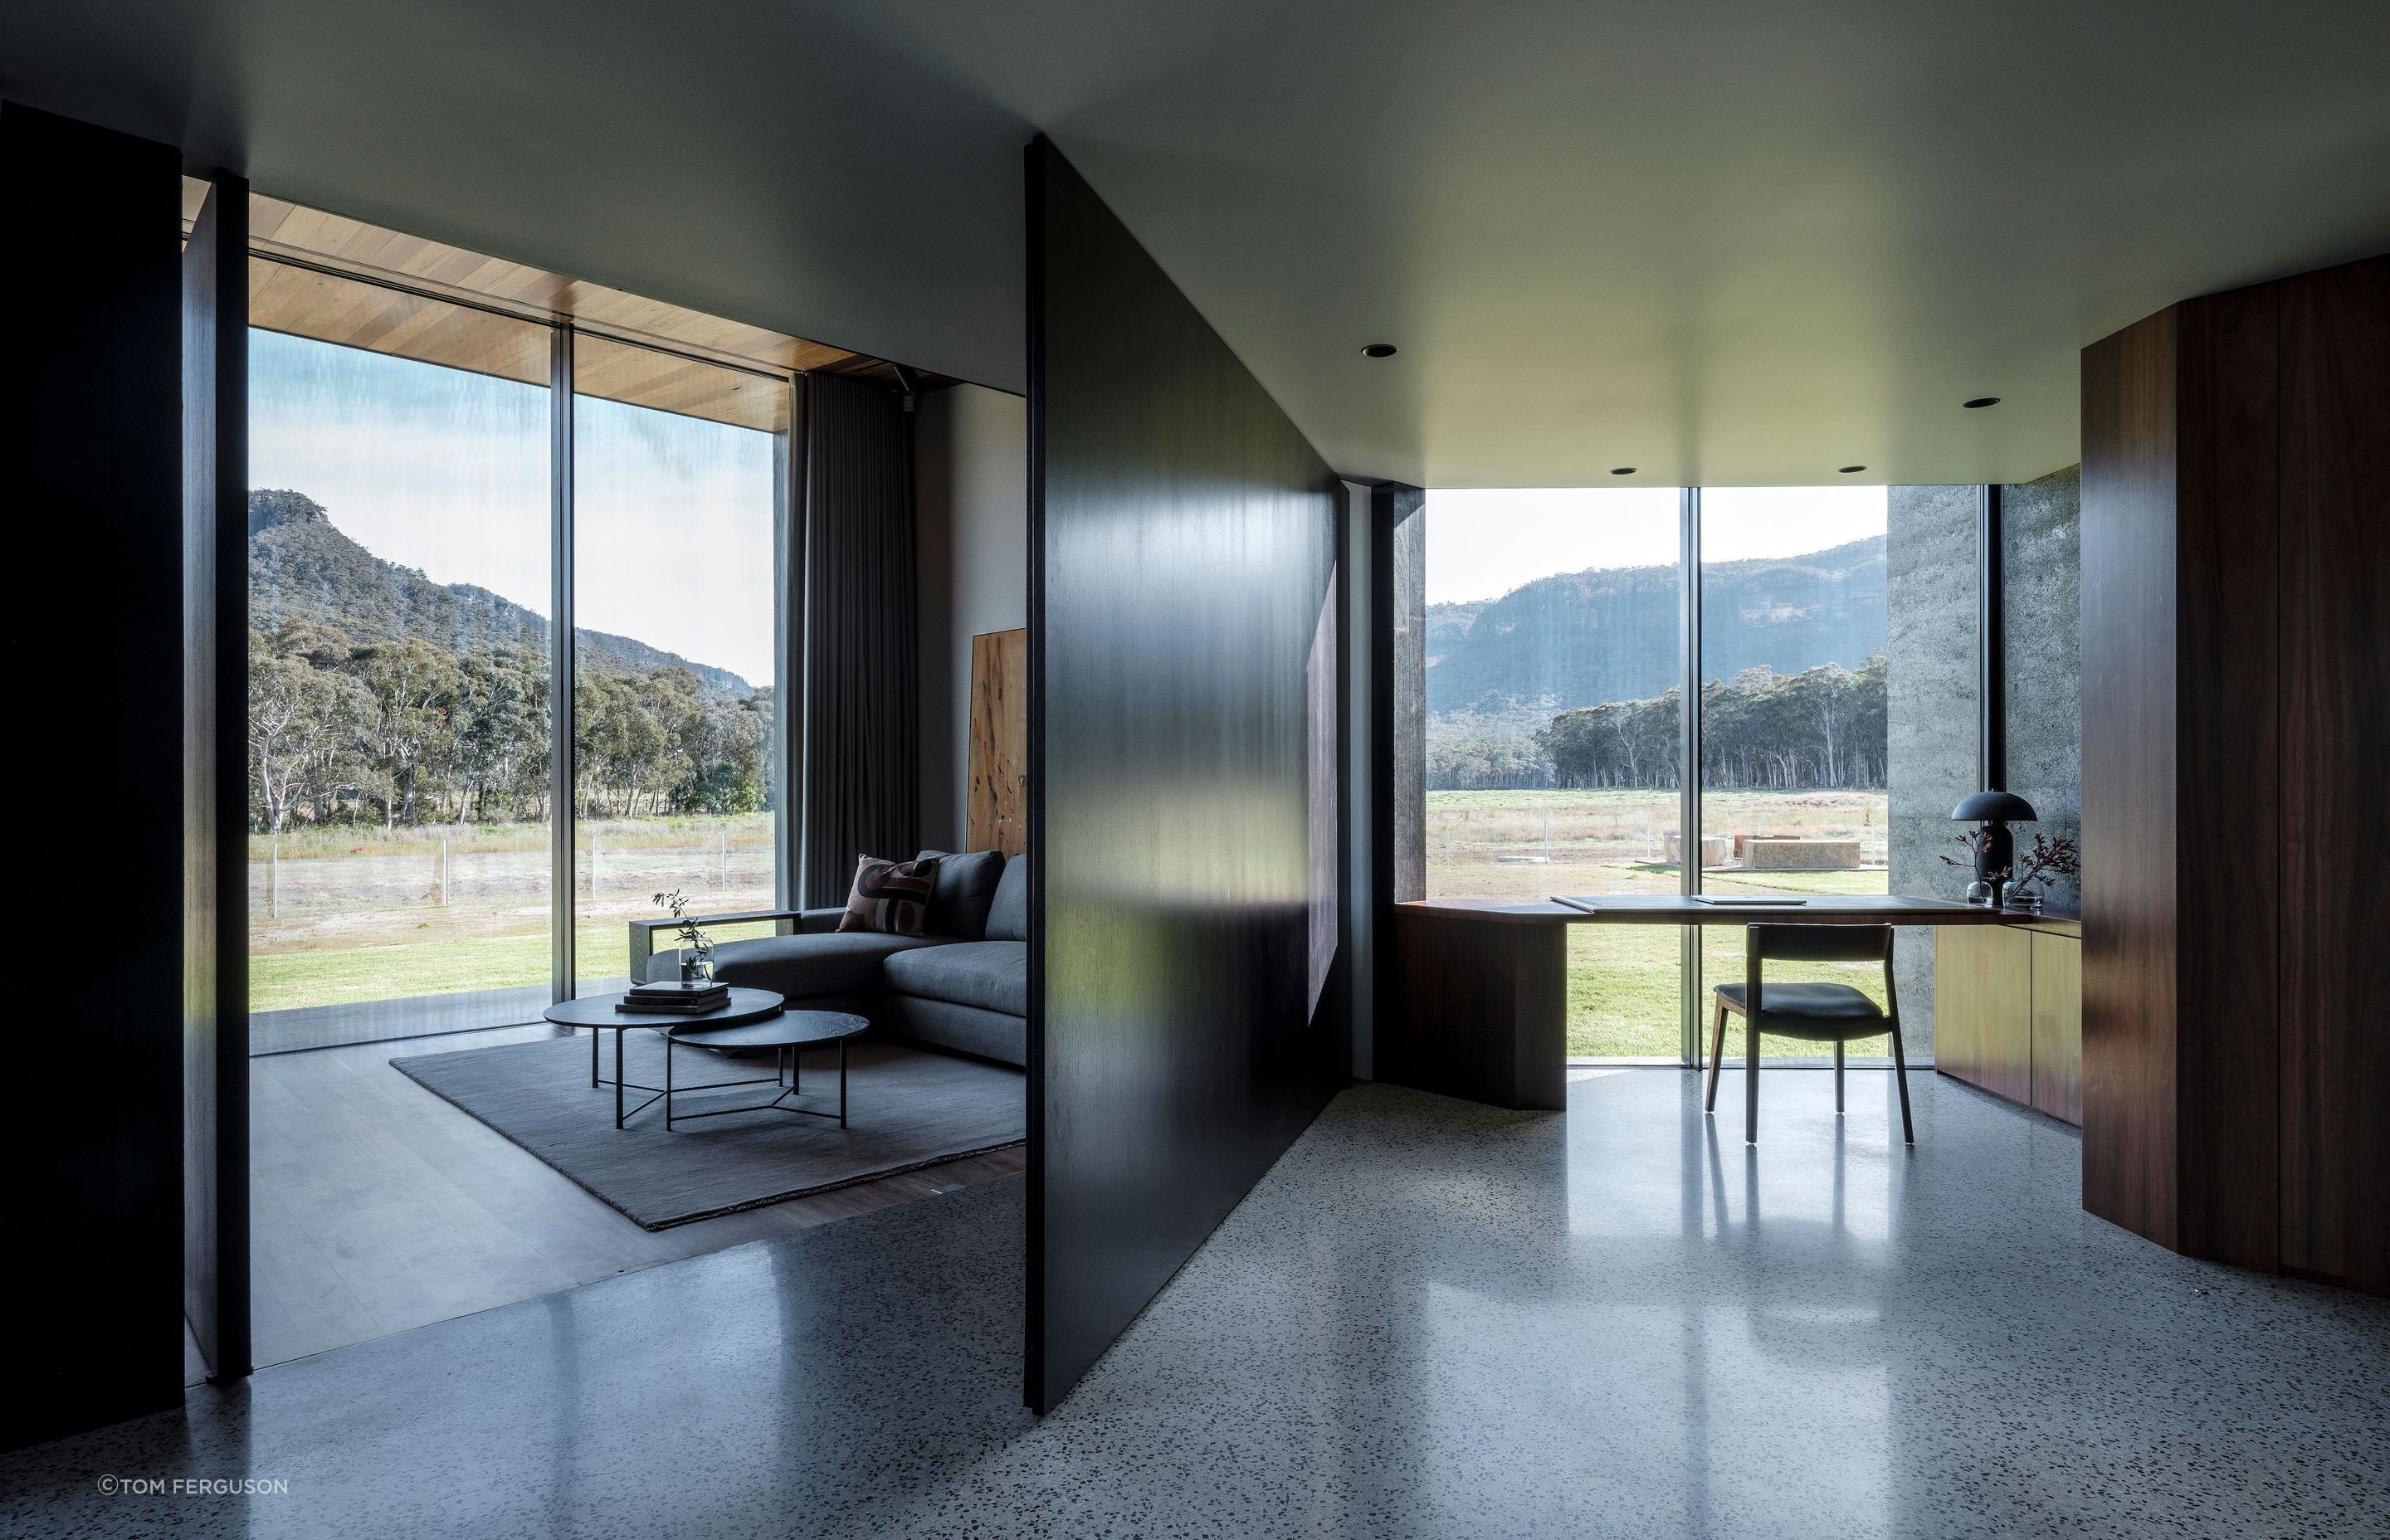 The home office boasts a large pivoting four-metre black wall; transforming the room into a lounge area, a private study or an additional bedroom.